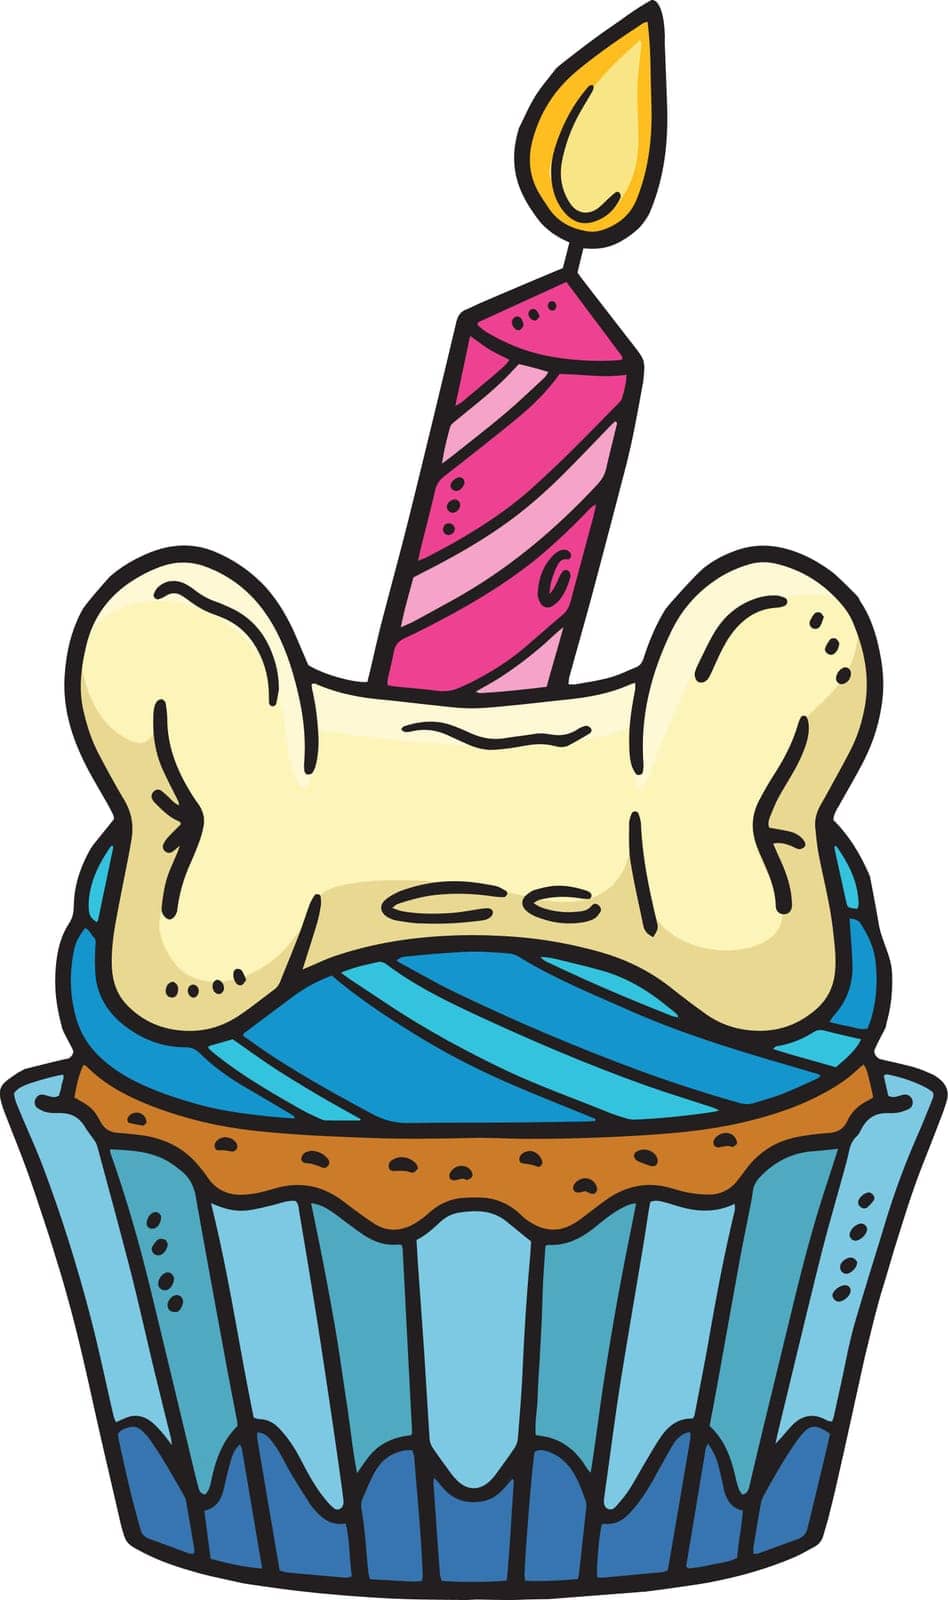 Birthday Cupcake with a Candle Cartoon Clipart by abbydesign